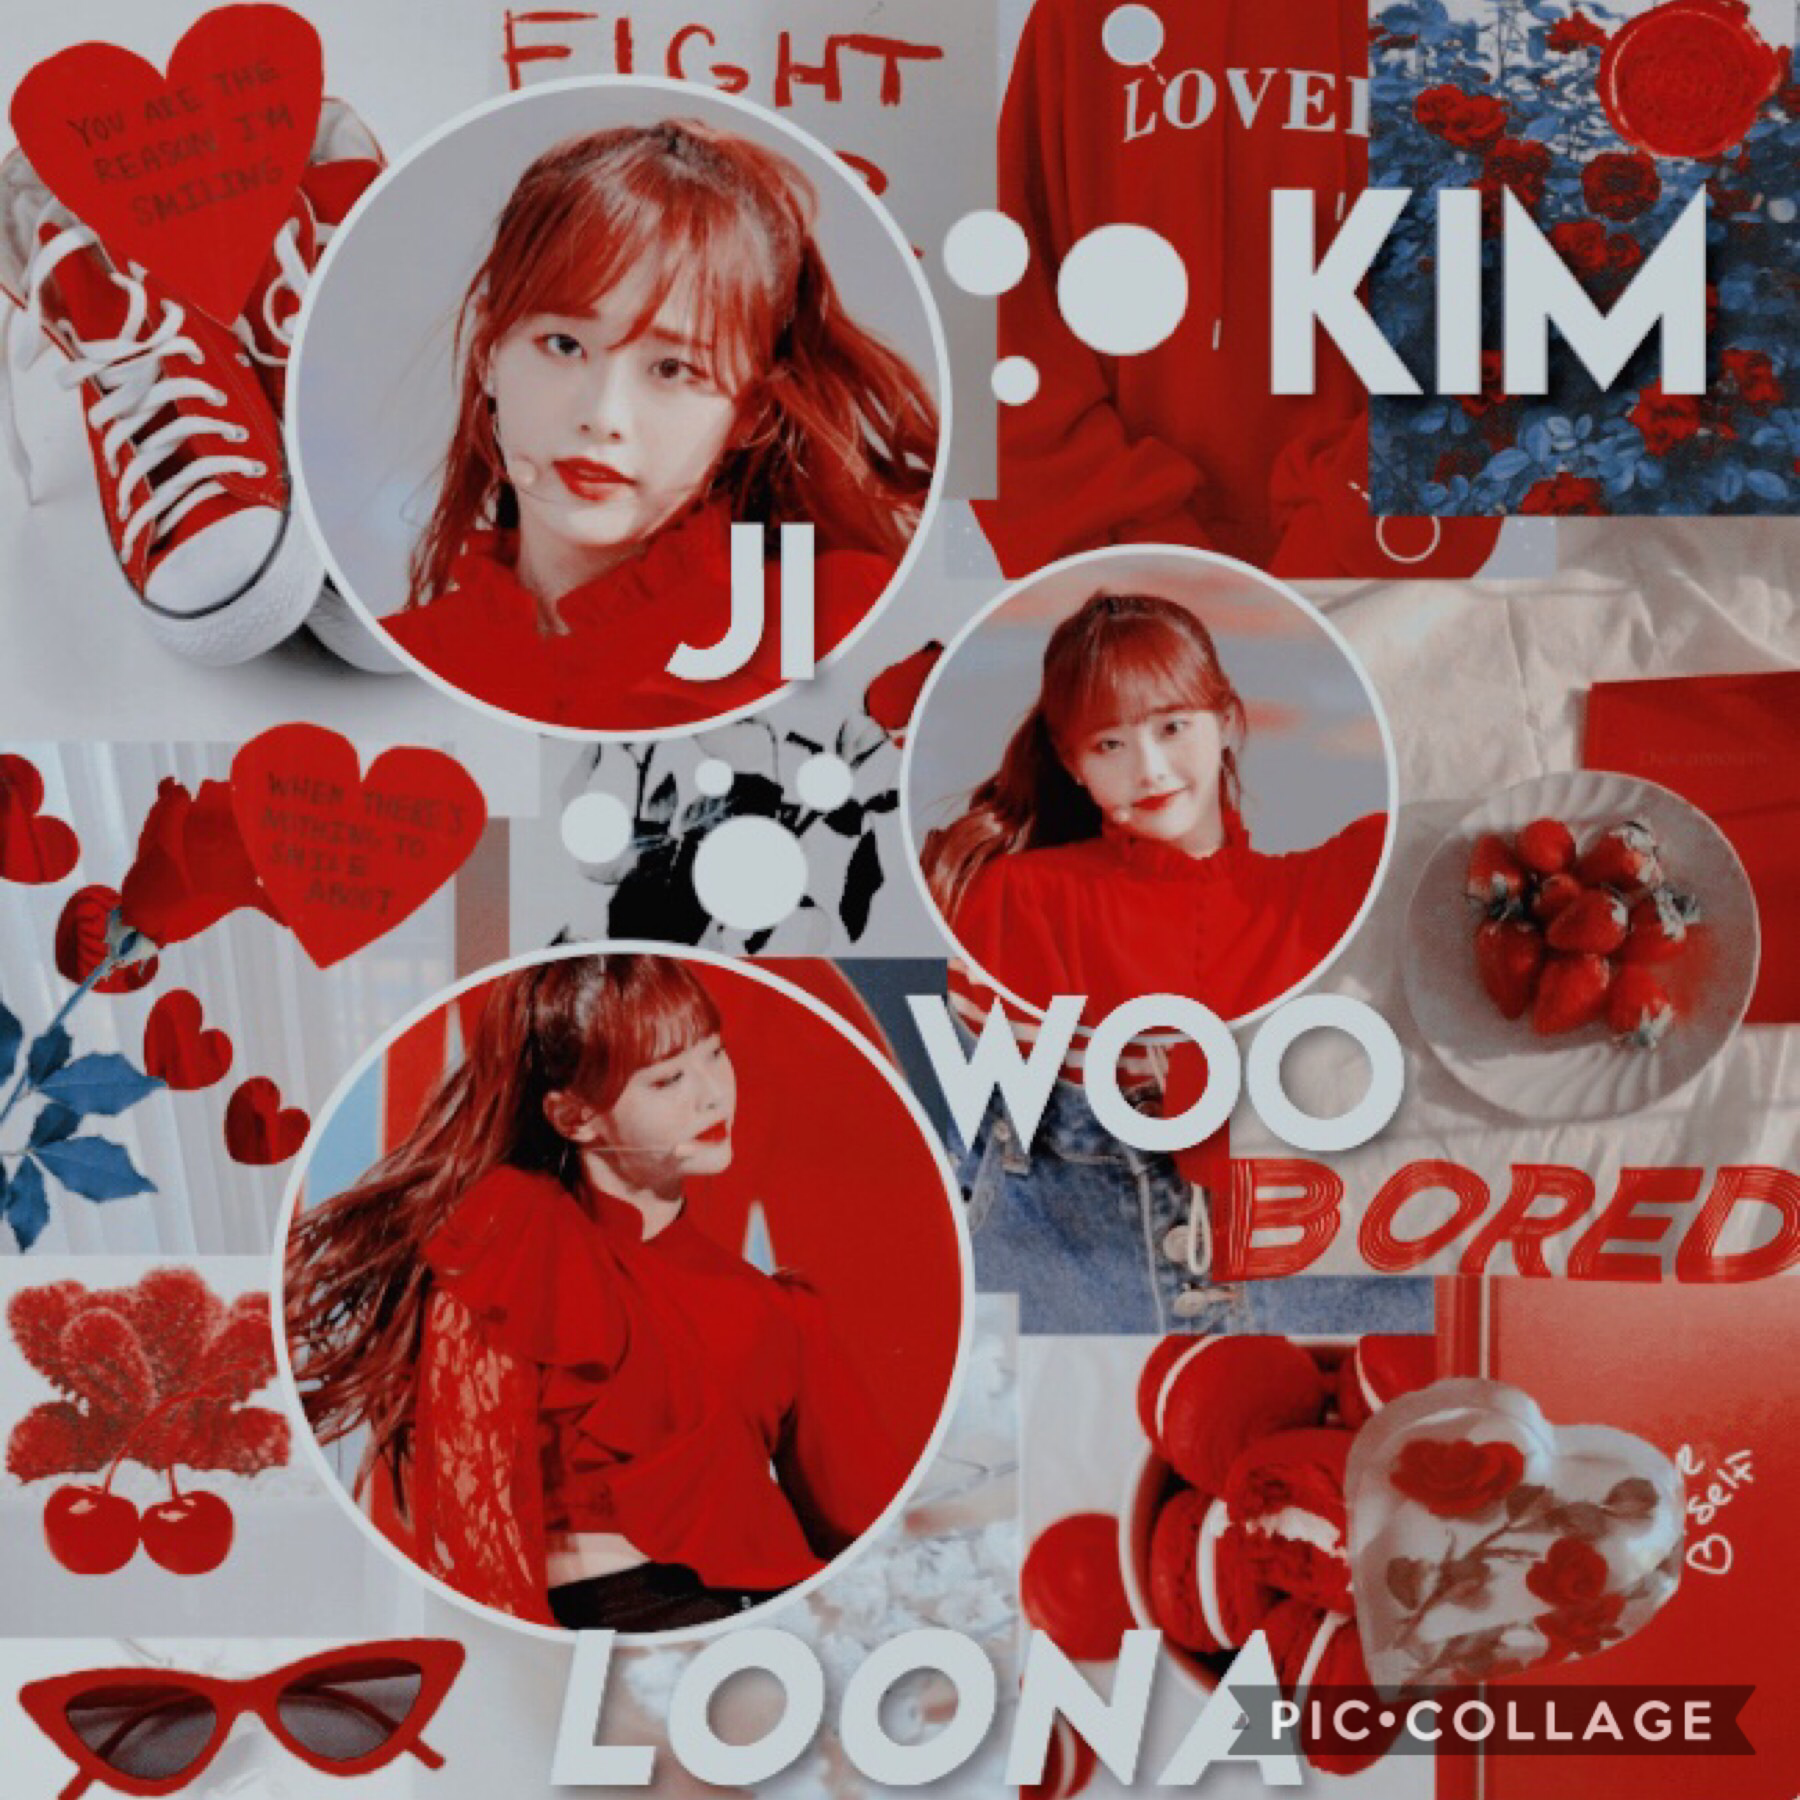 tap tap tap tap
I’m back to say:
1: omg I love mei.
2: this is an edit for mei (and for me!) because Chuu is her bias aNd my ult. bias.
3: I deleted my twitter acc a couple weeks ago so I’ll create an acc on insta
4: happy birthday to kimchi- oh wait that